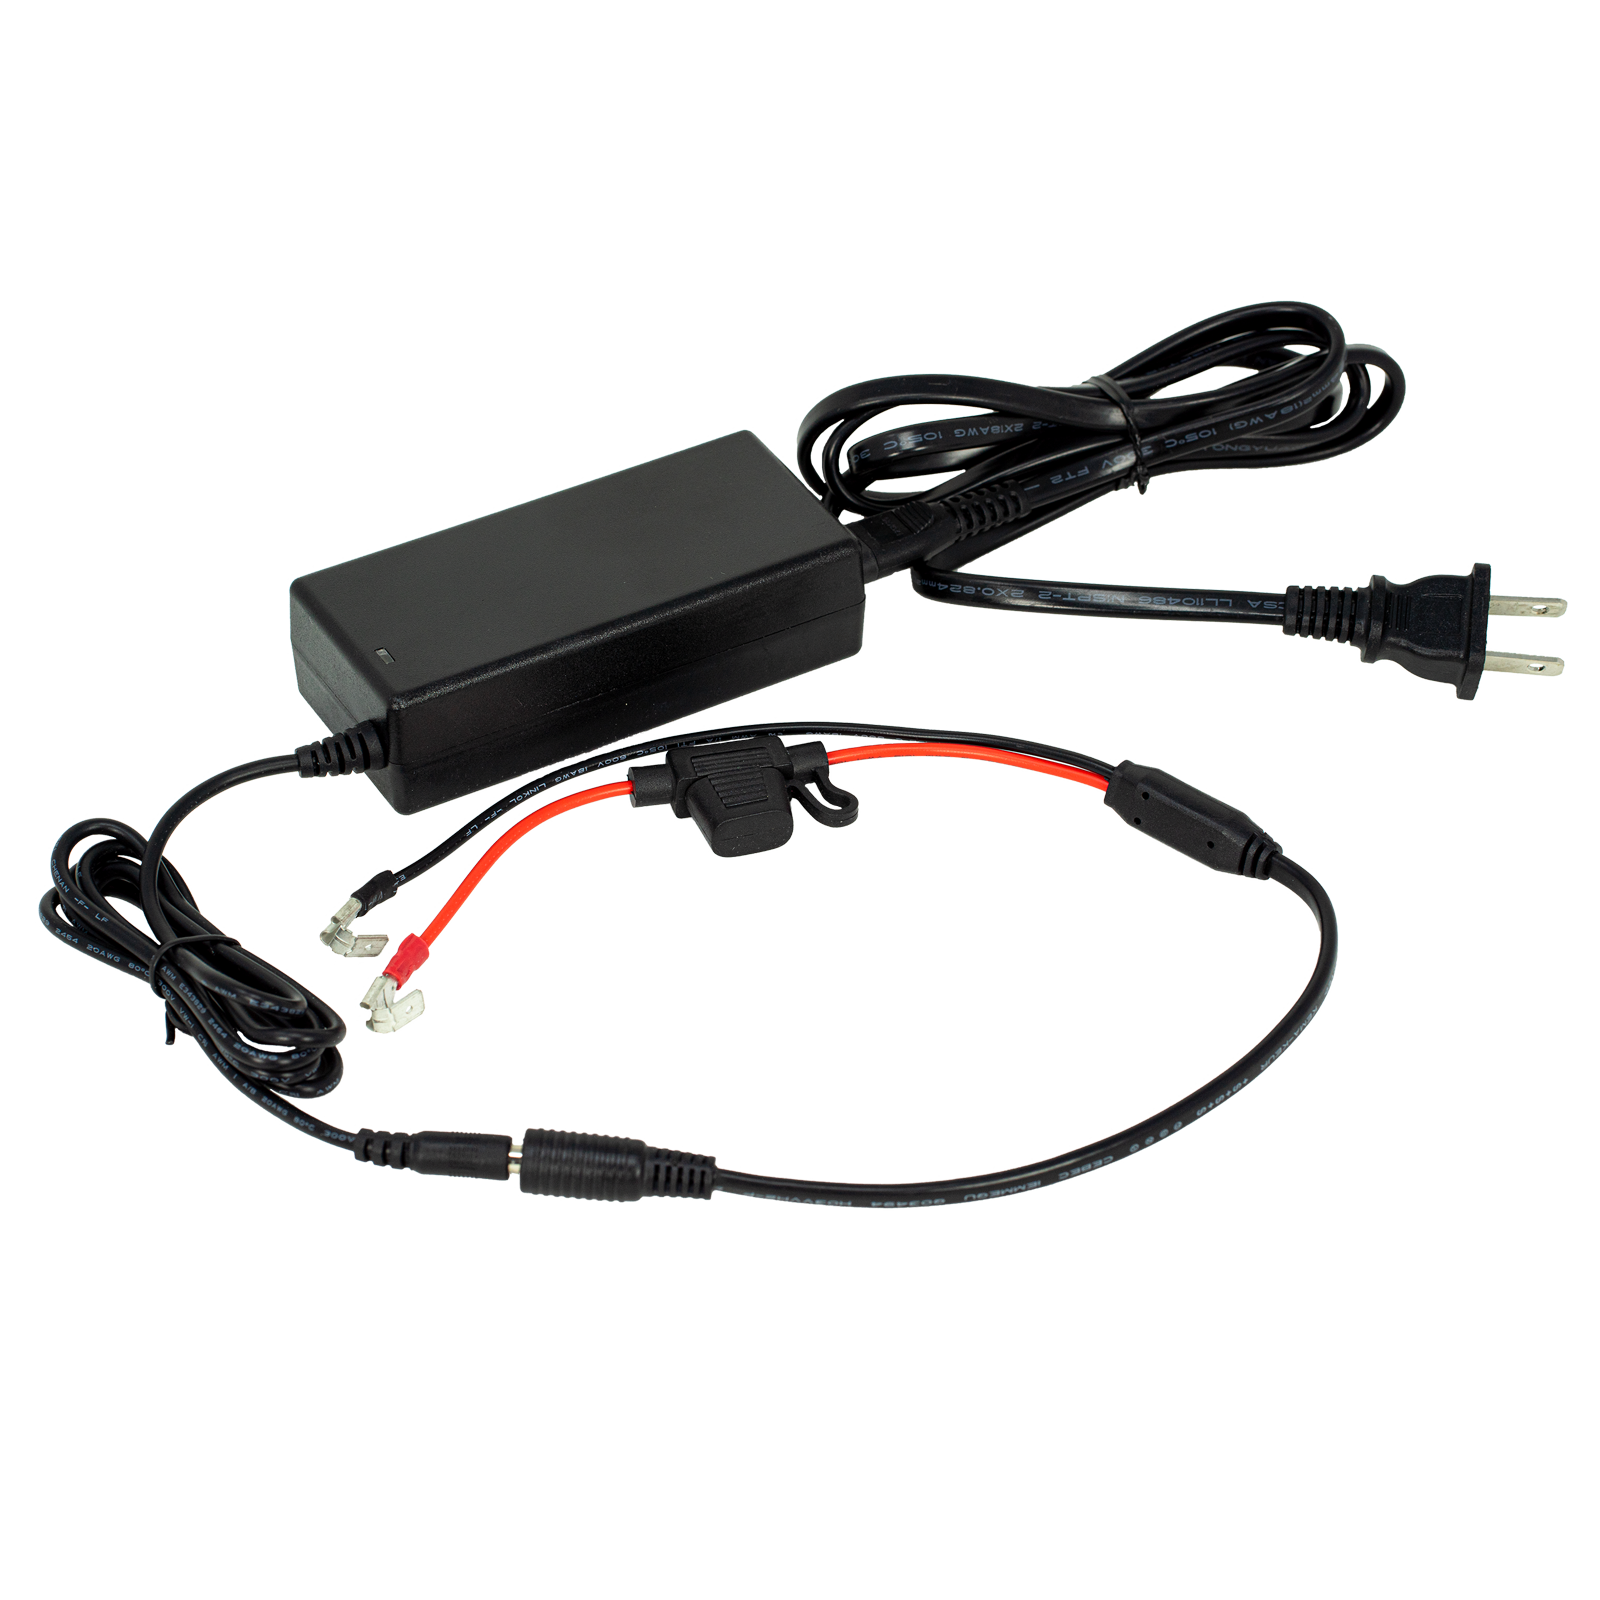 https://static.upnorthsports.com/Image/catimages/LIONCHG123_12v3amp-Mite-Charger-and-wire-harness-1600.png